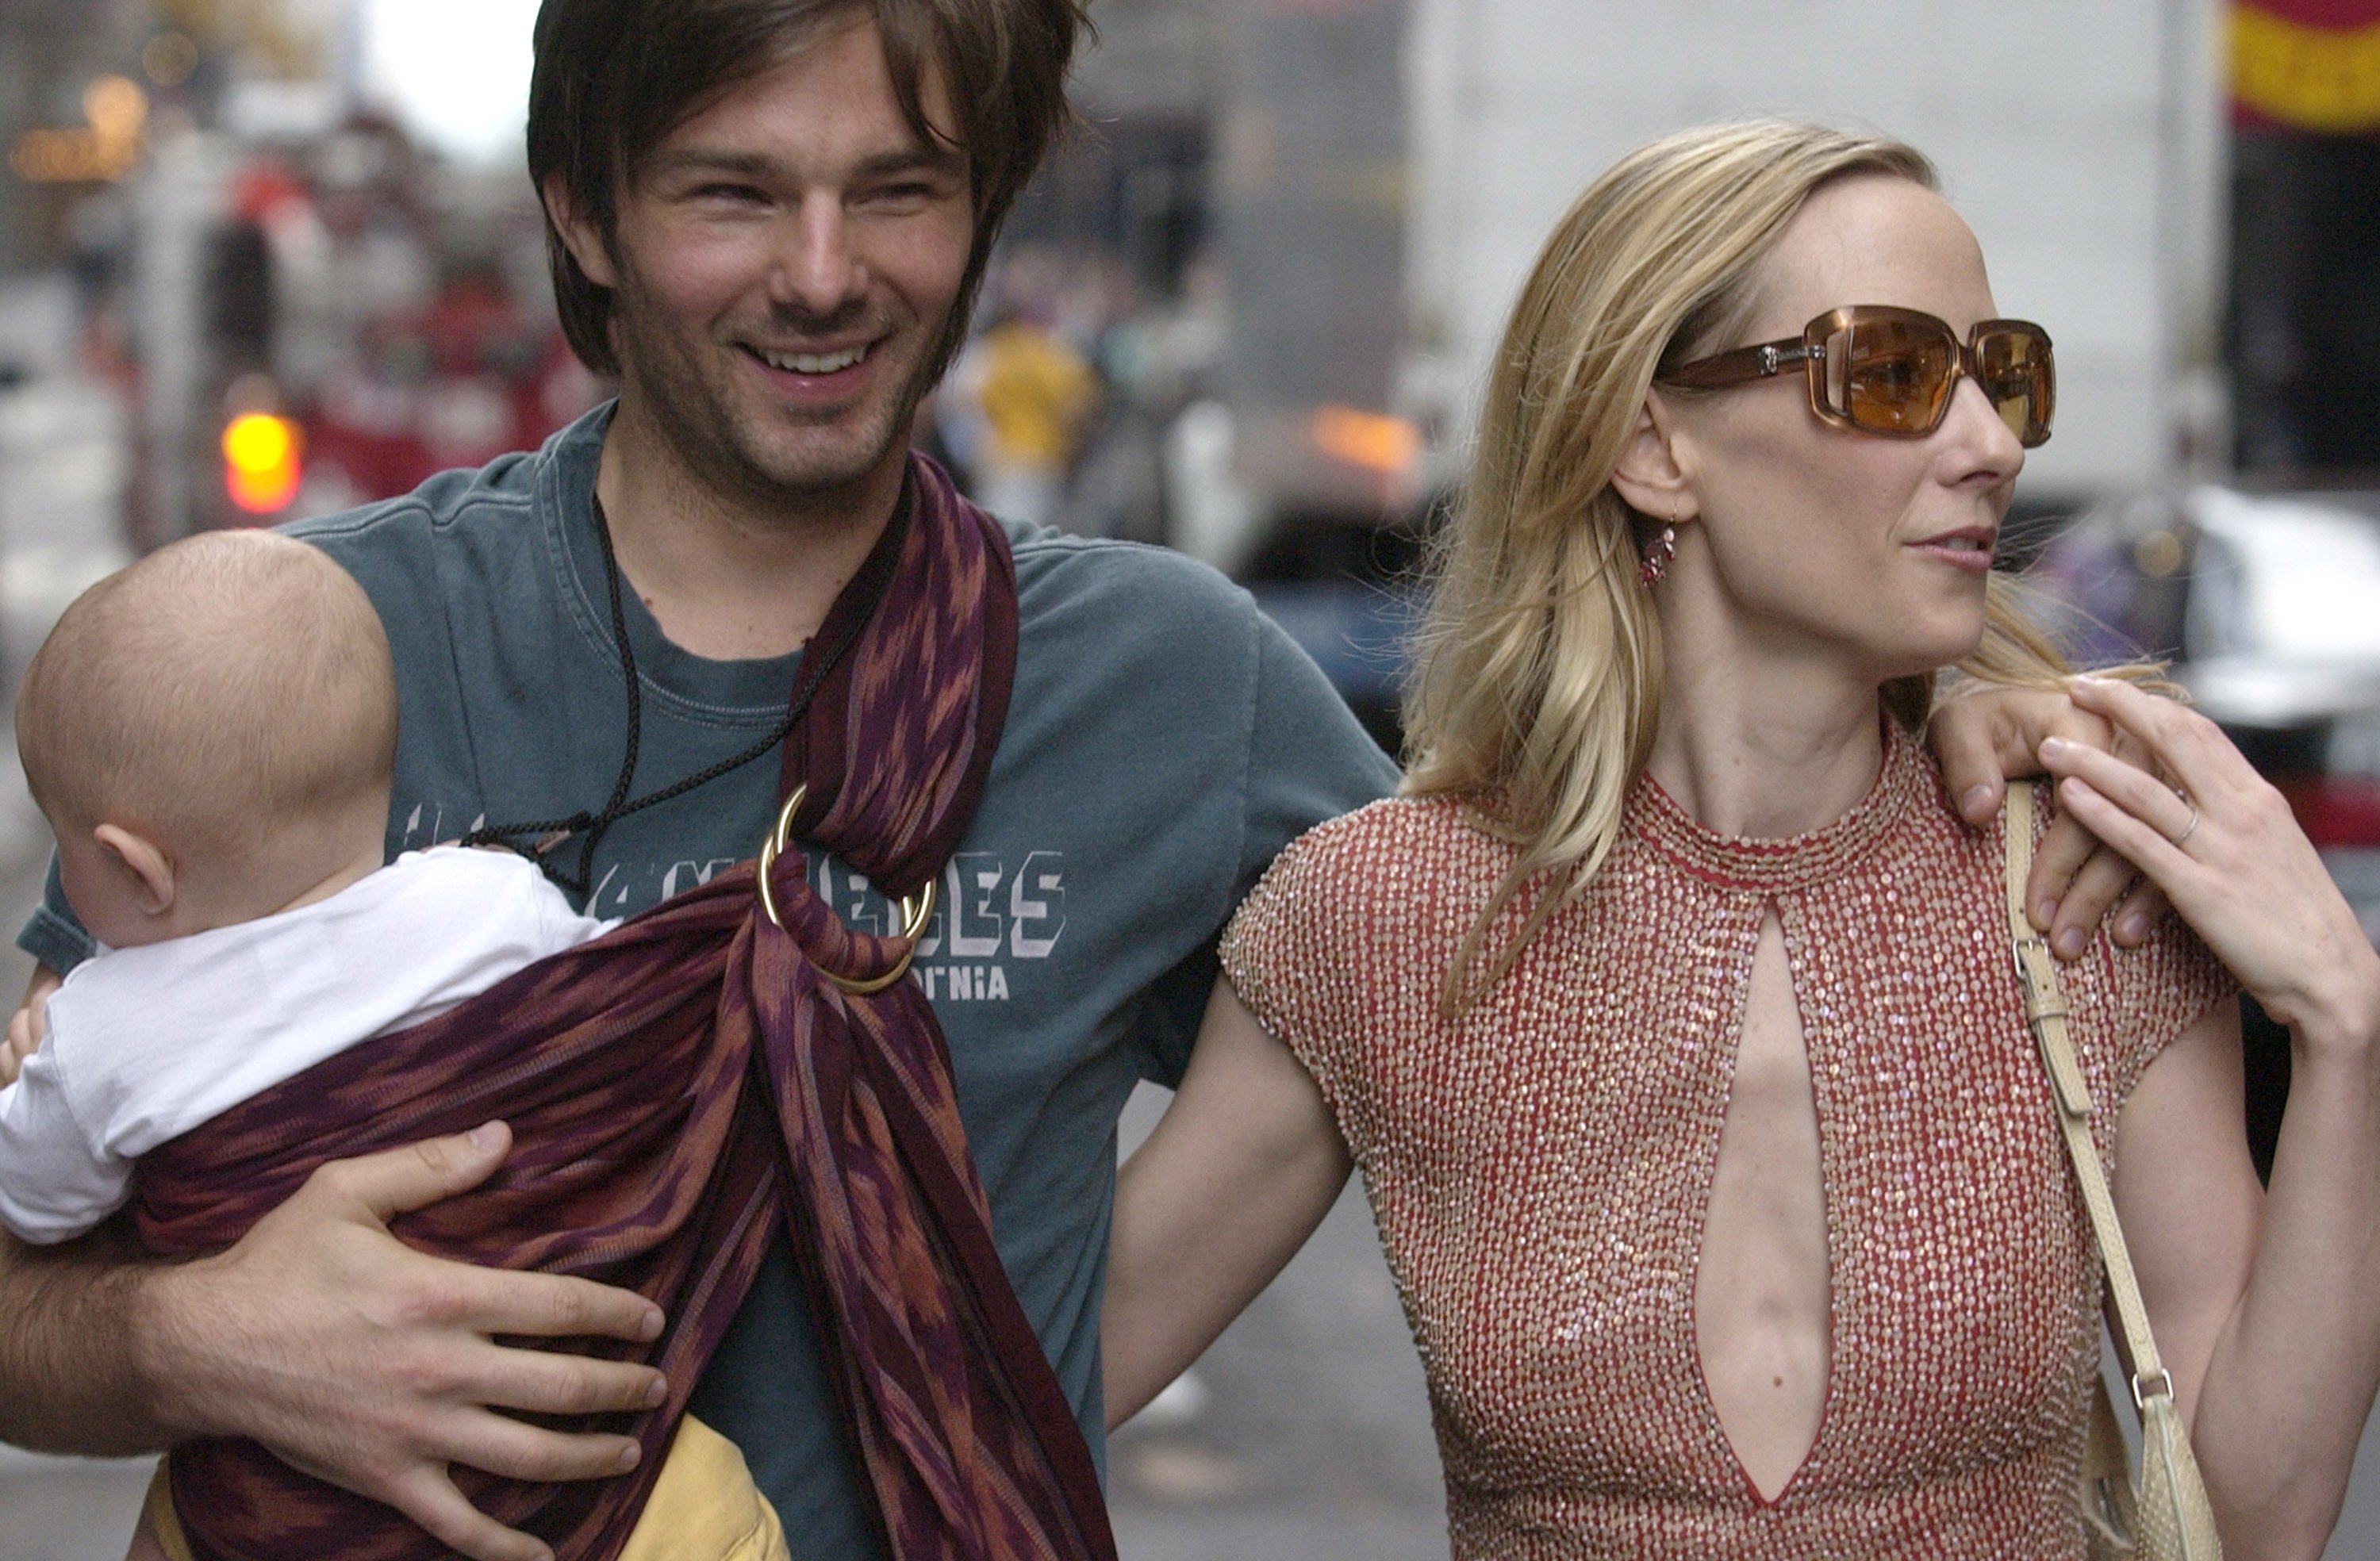 Anne Heche with Coley Laffoon and Homer, leaving "Broadway on Broadway" in Times Square in New York City, New York, United States | Source: Getty Images 